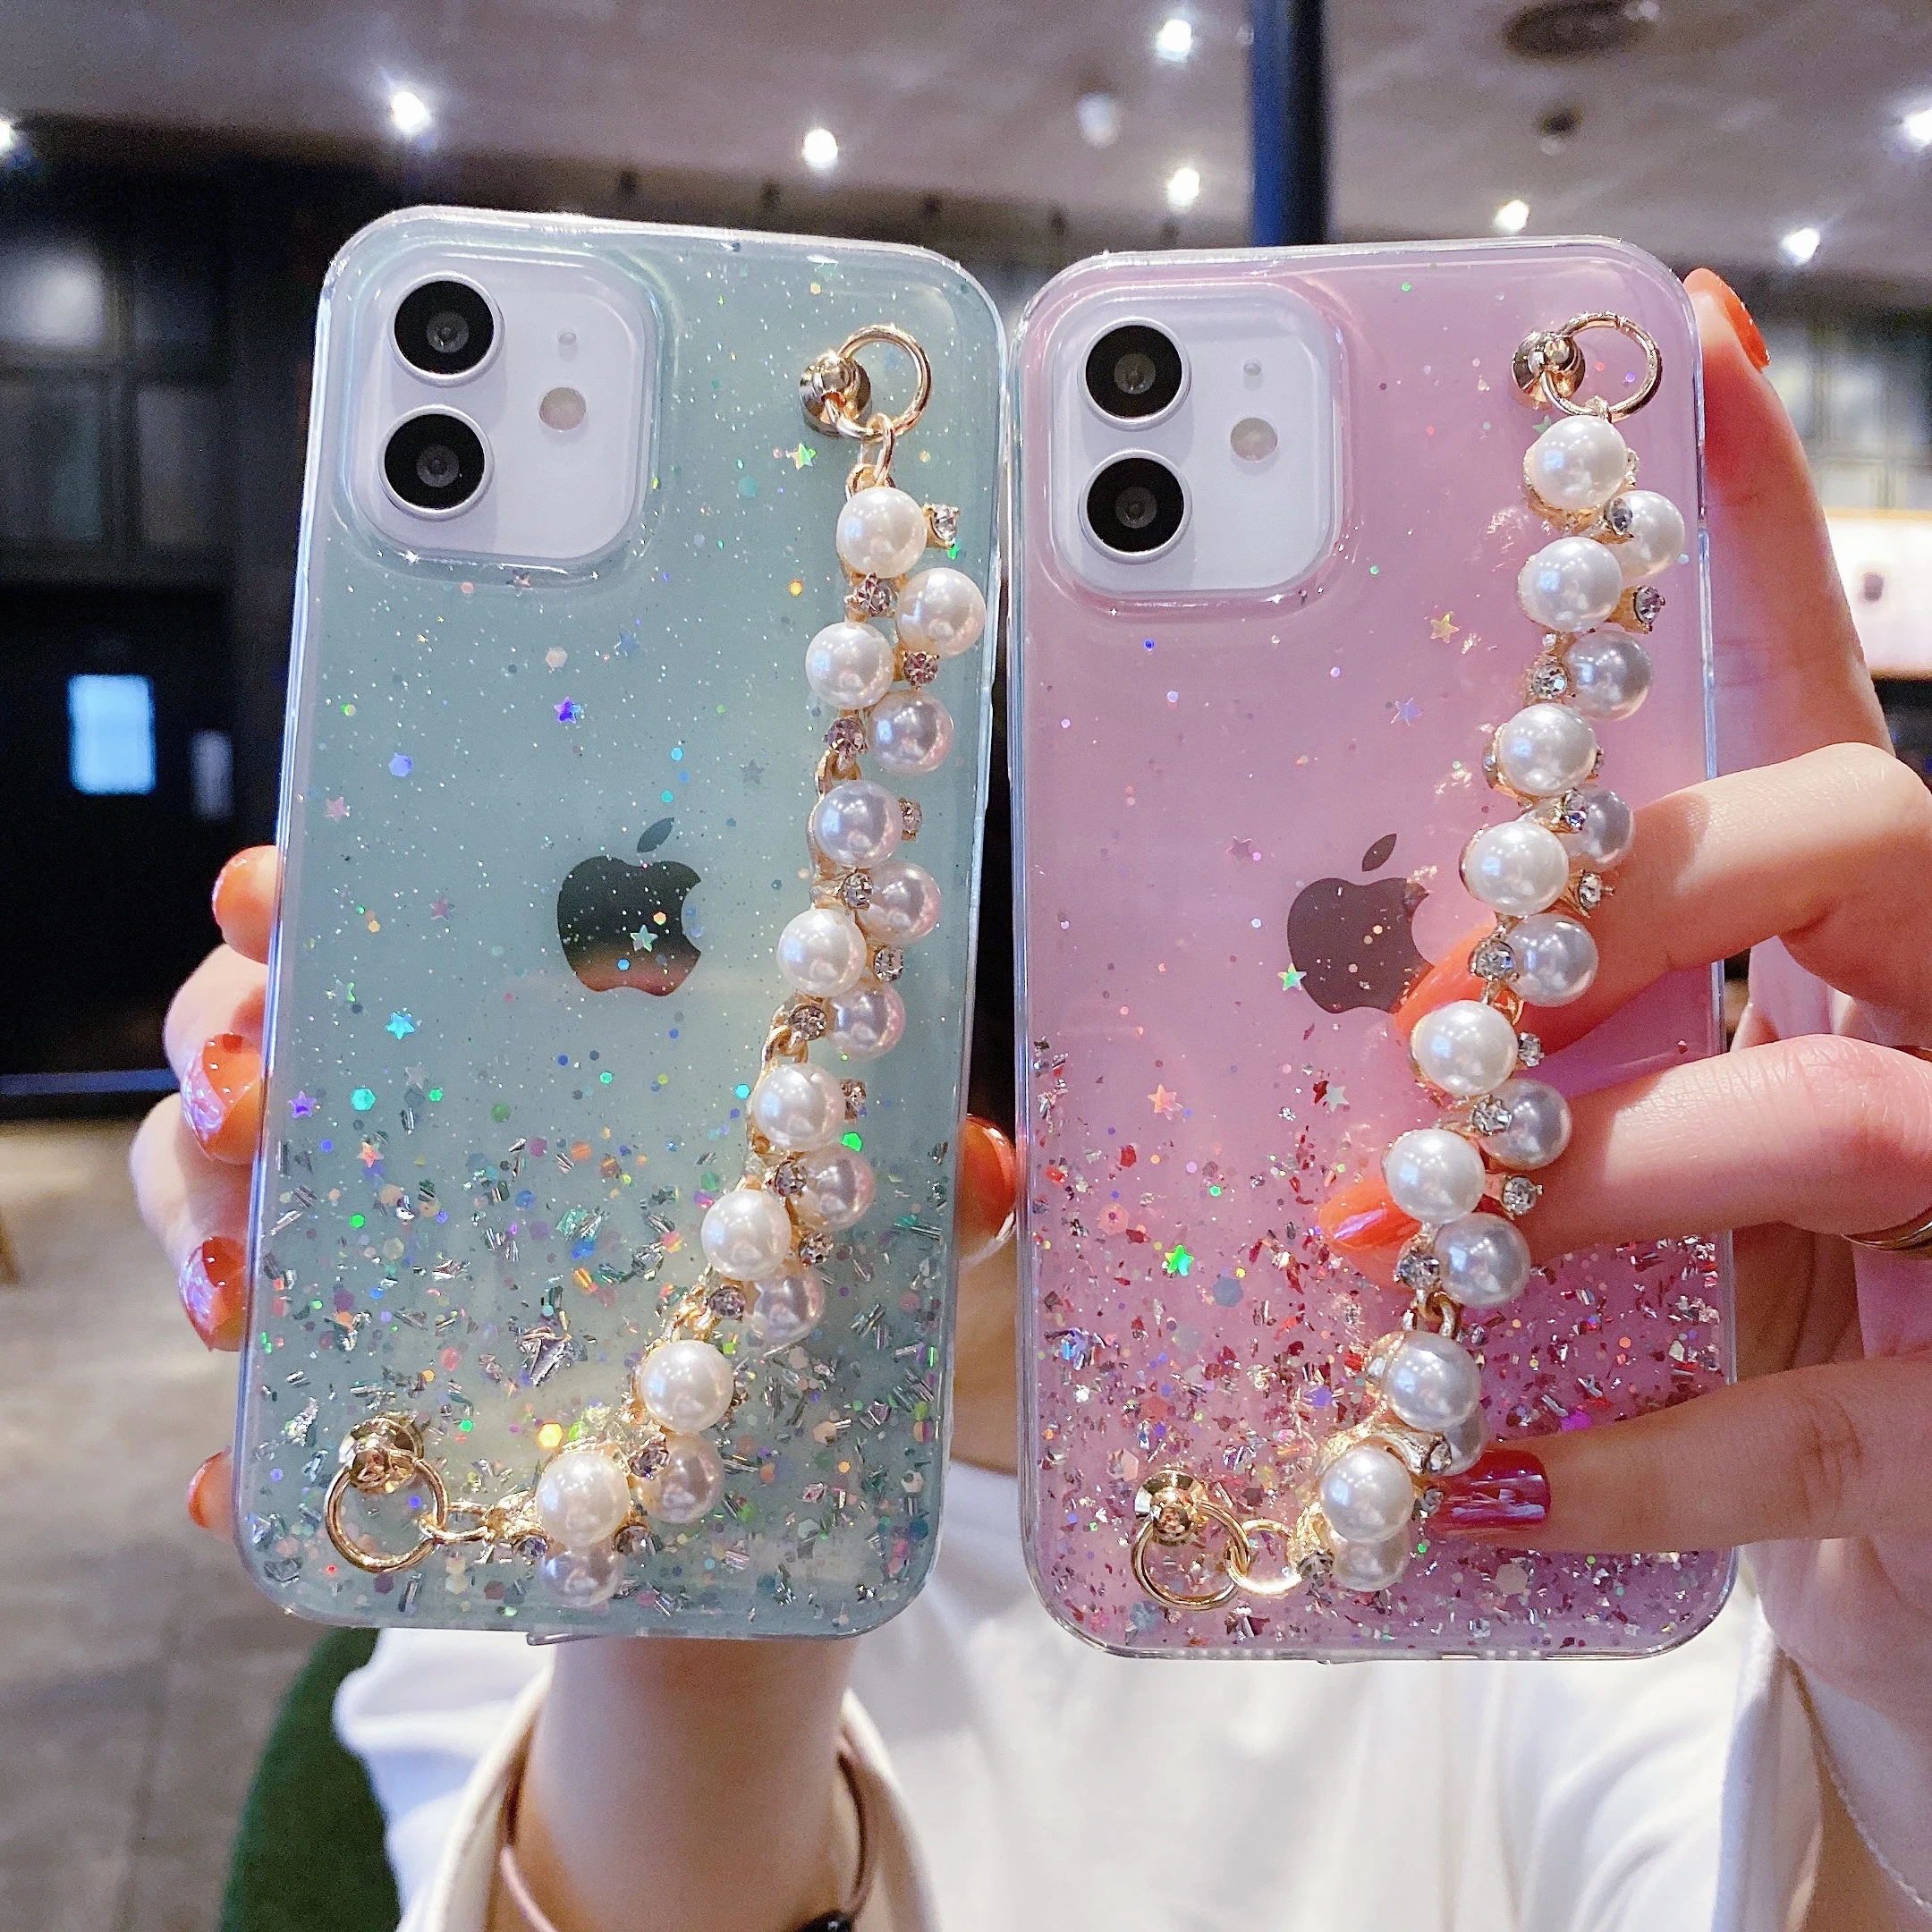 

Luxury Cute Pearl long chain Glitter Bling Soft Case Cover shell for iphone 6/7/8 7P/8P X XS XR XSMAX 11 PRO 12 12 PRO MAX